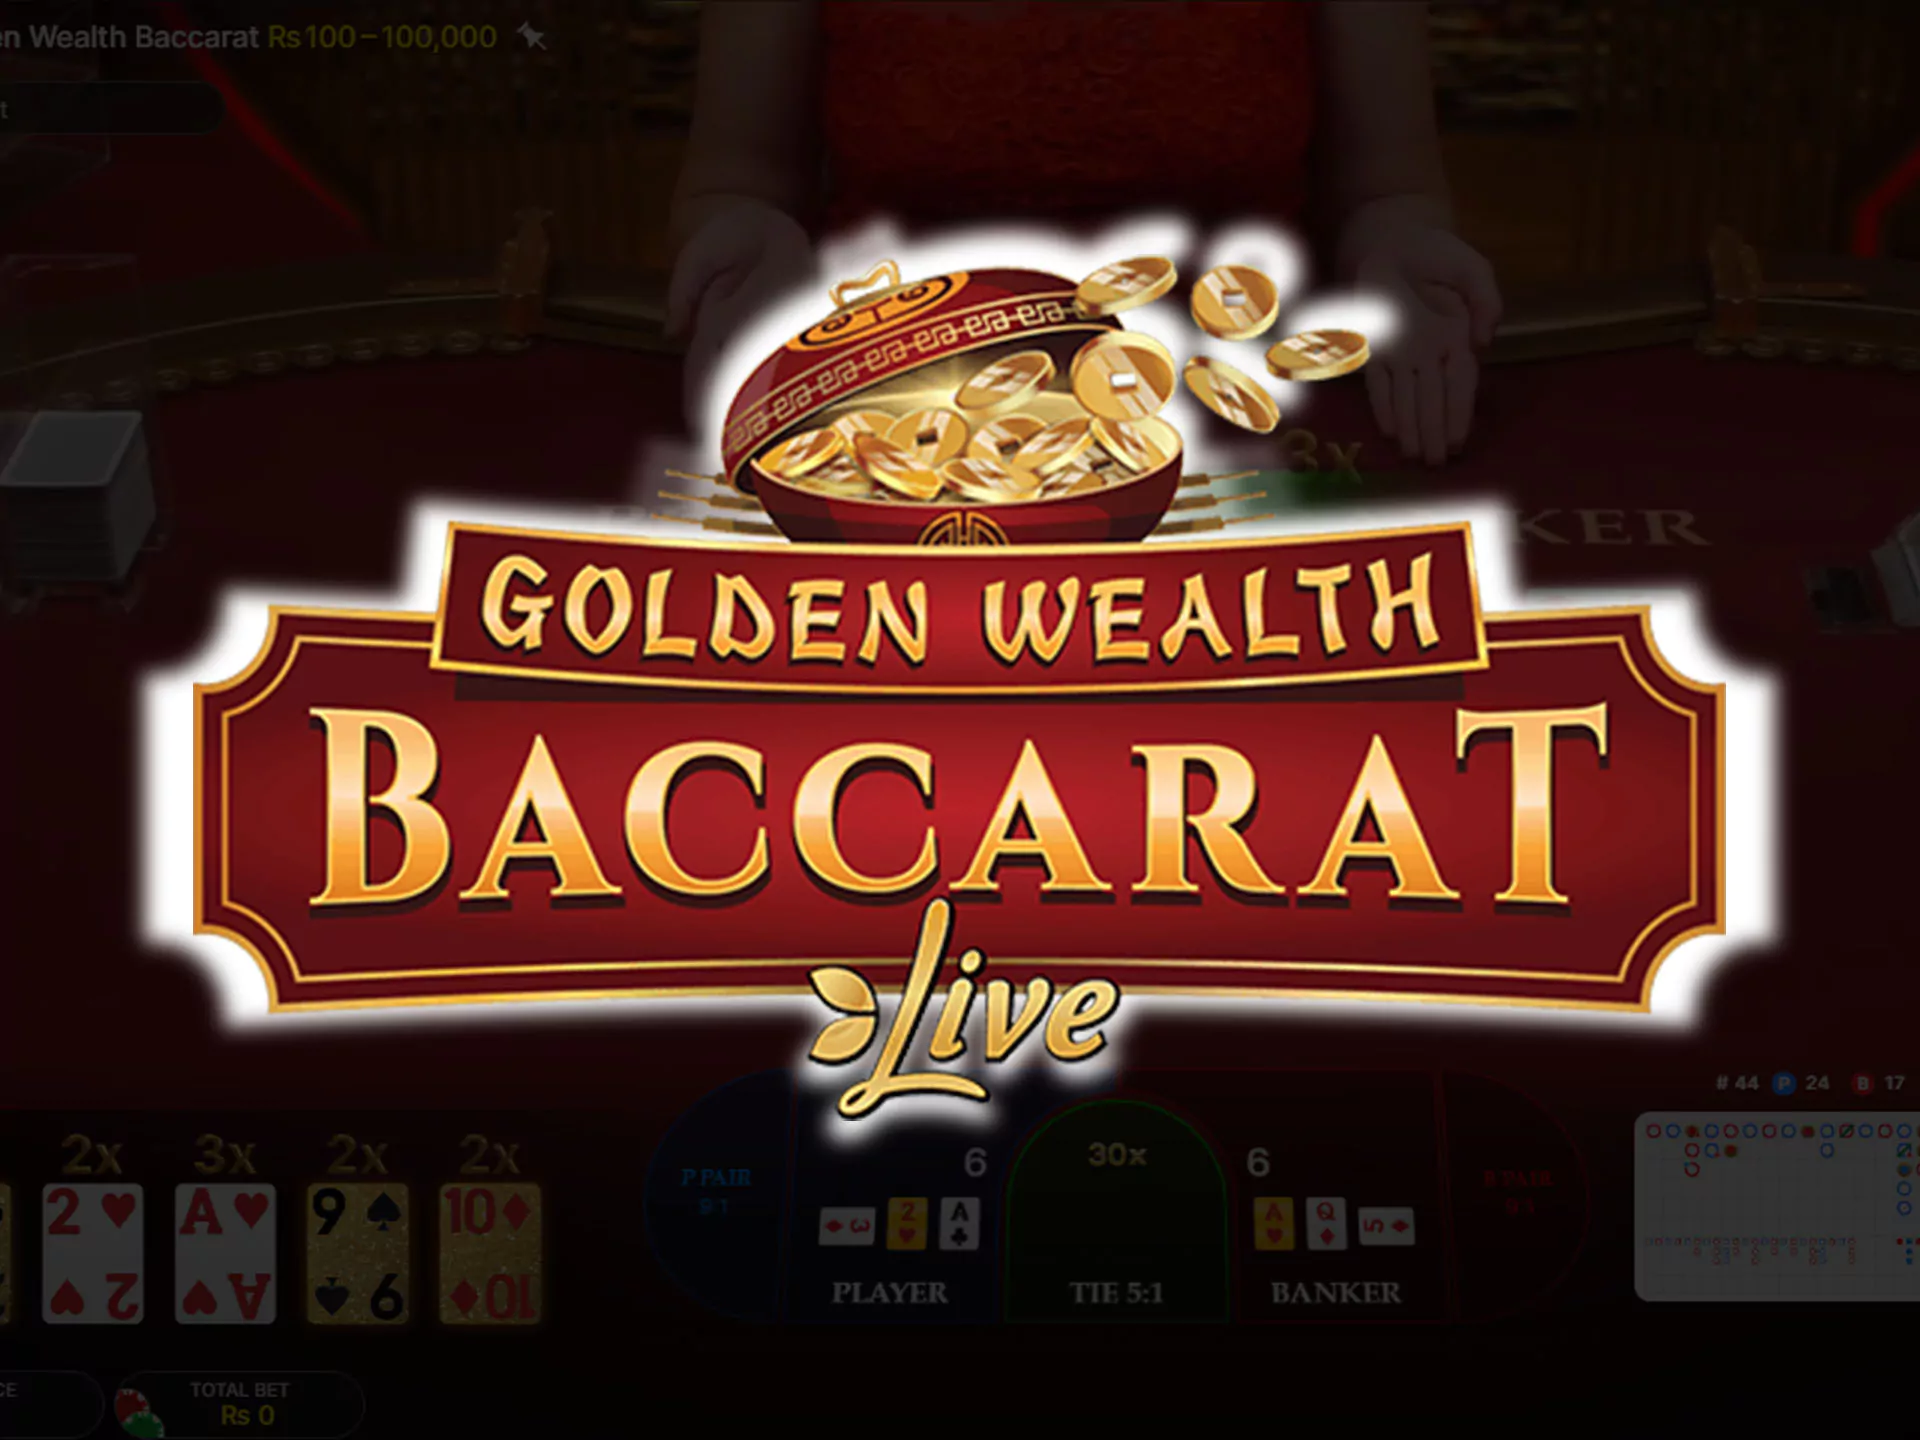 10Cric casino supports the game Live Baccarat.